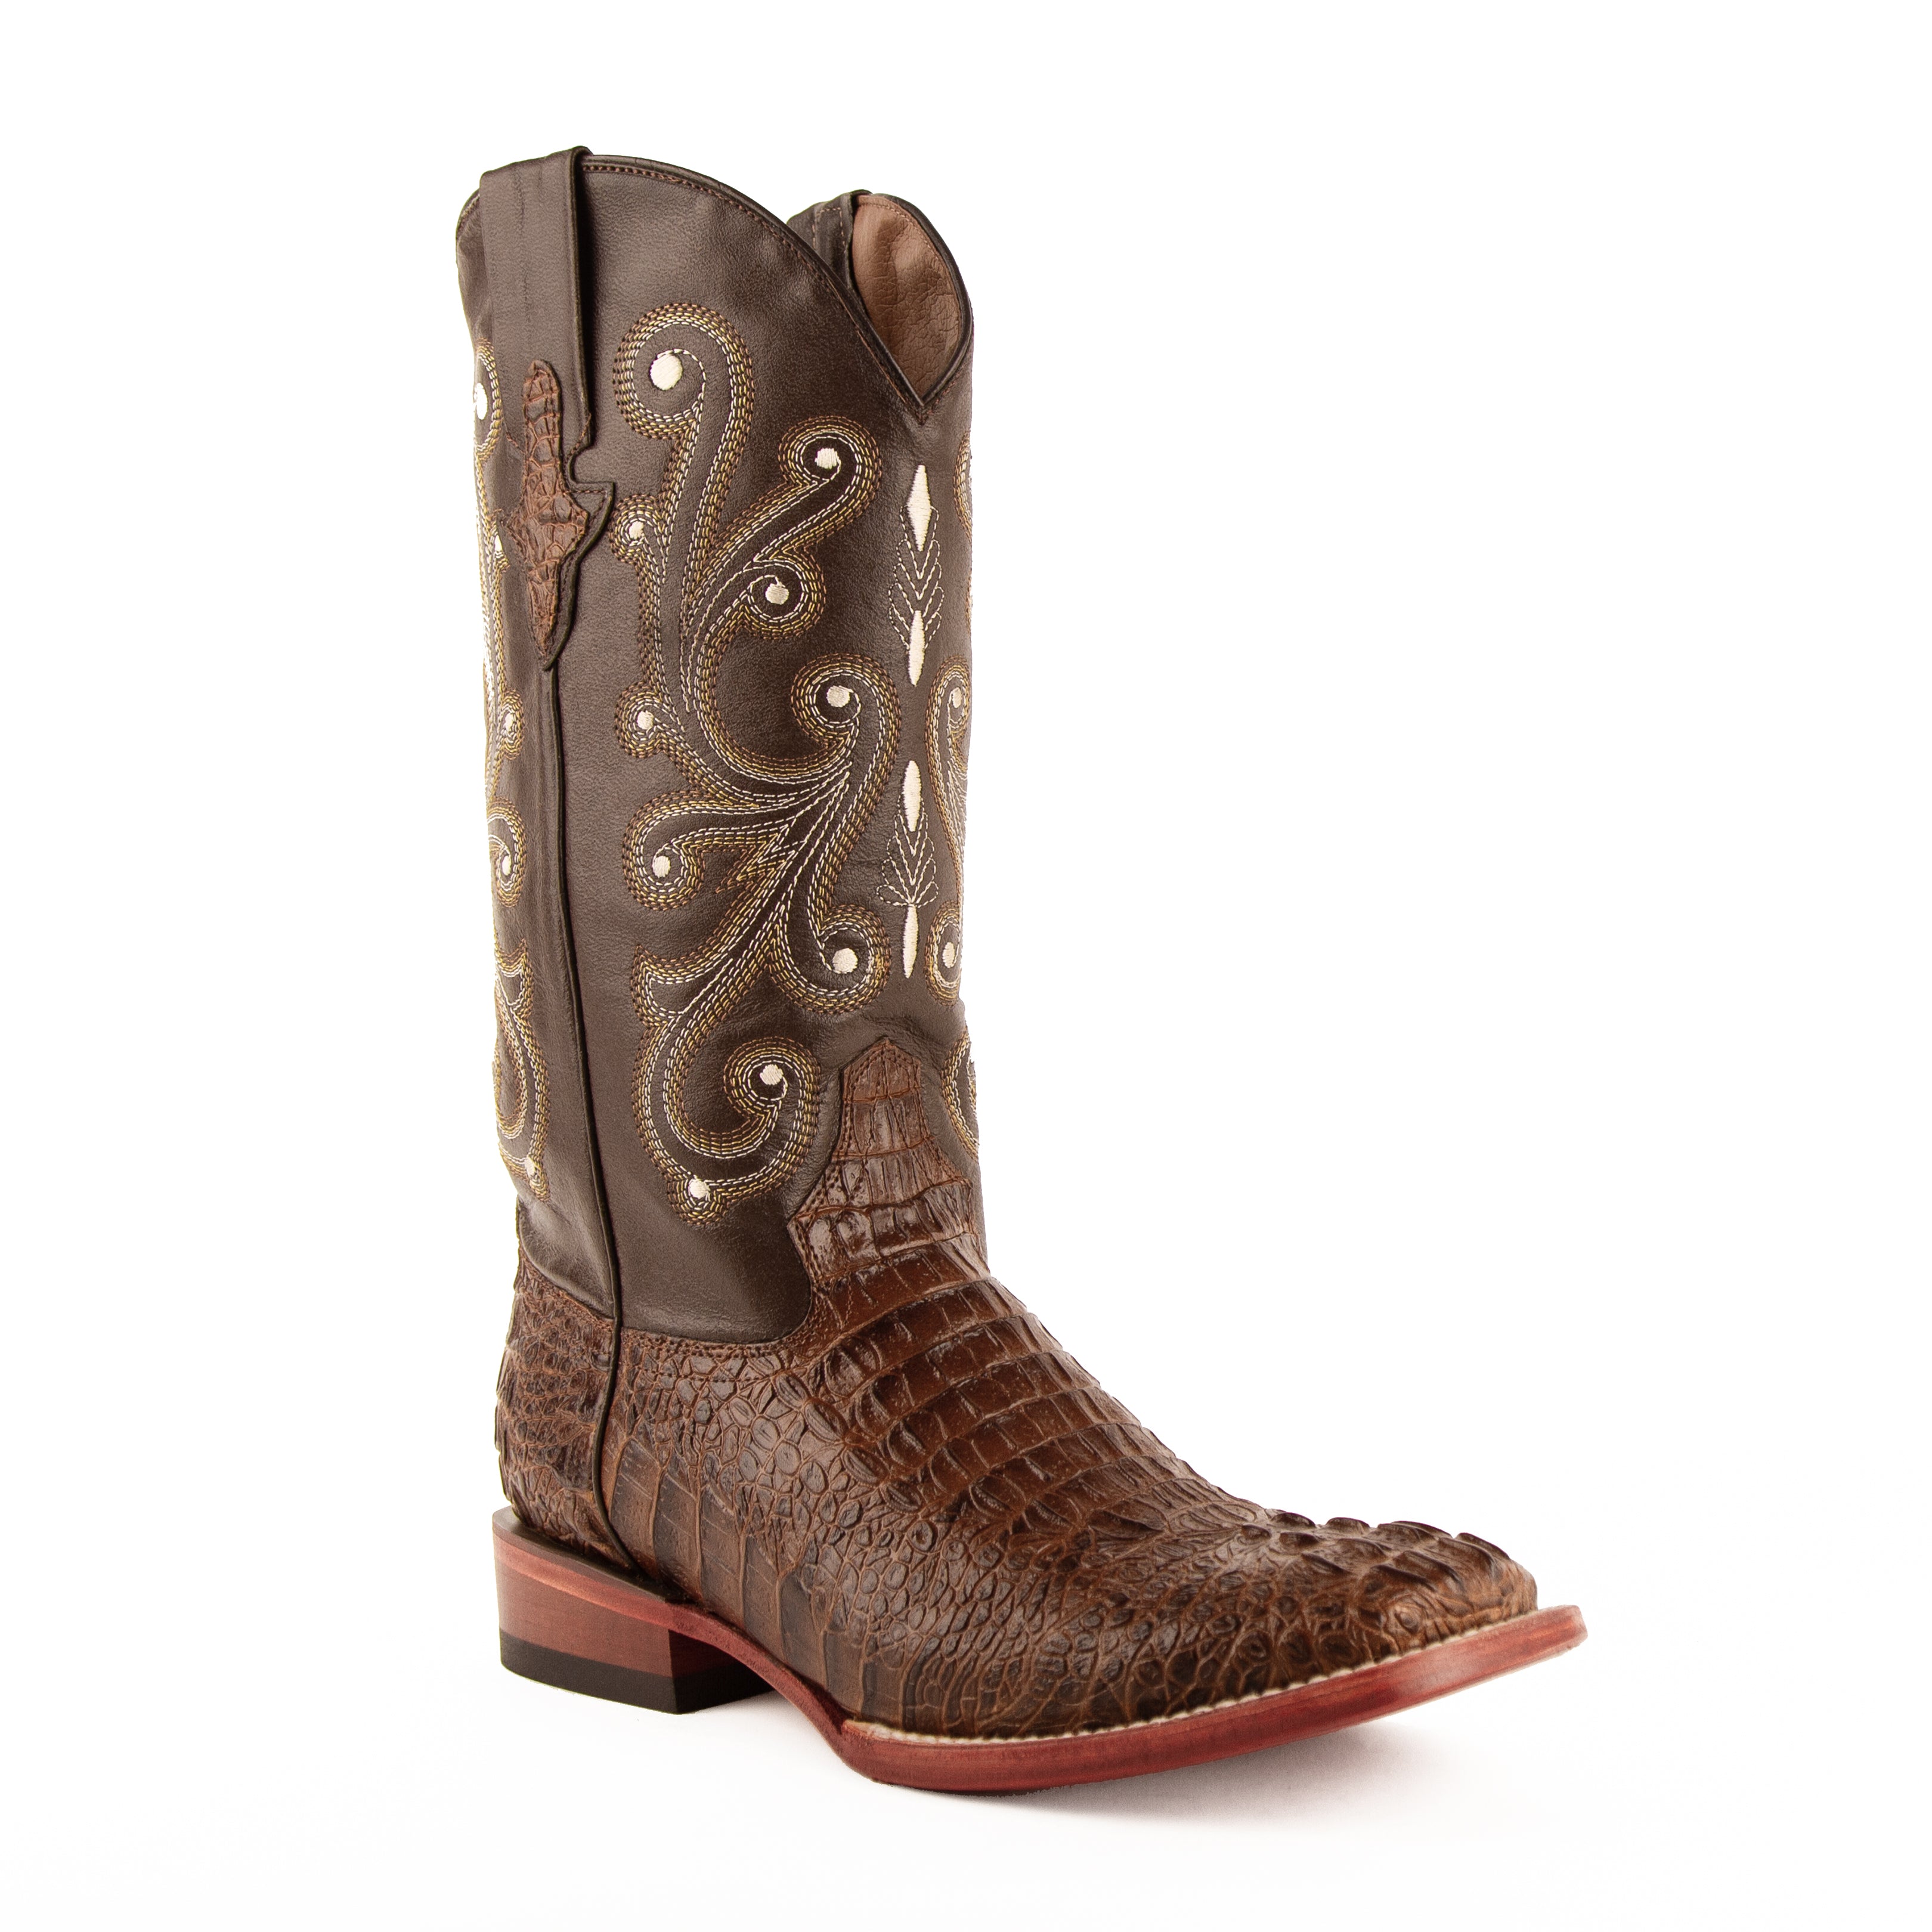 Mens Brown Crocodile Belly Print Exotic Leather Boot. Traditional look perfect in the arena, business meetings or social settings. Truly a boot for any occasion.